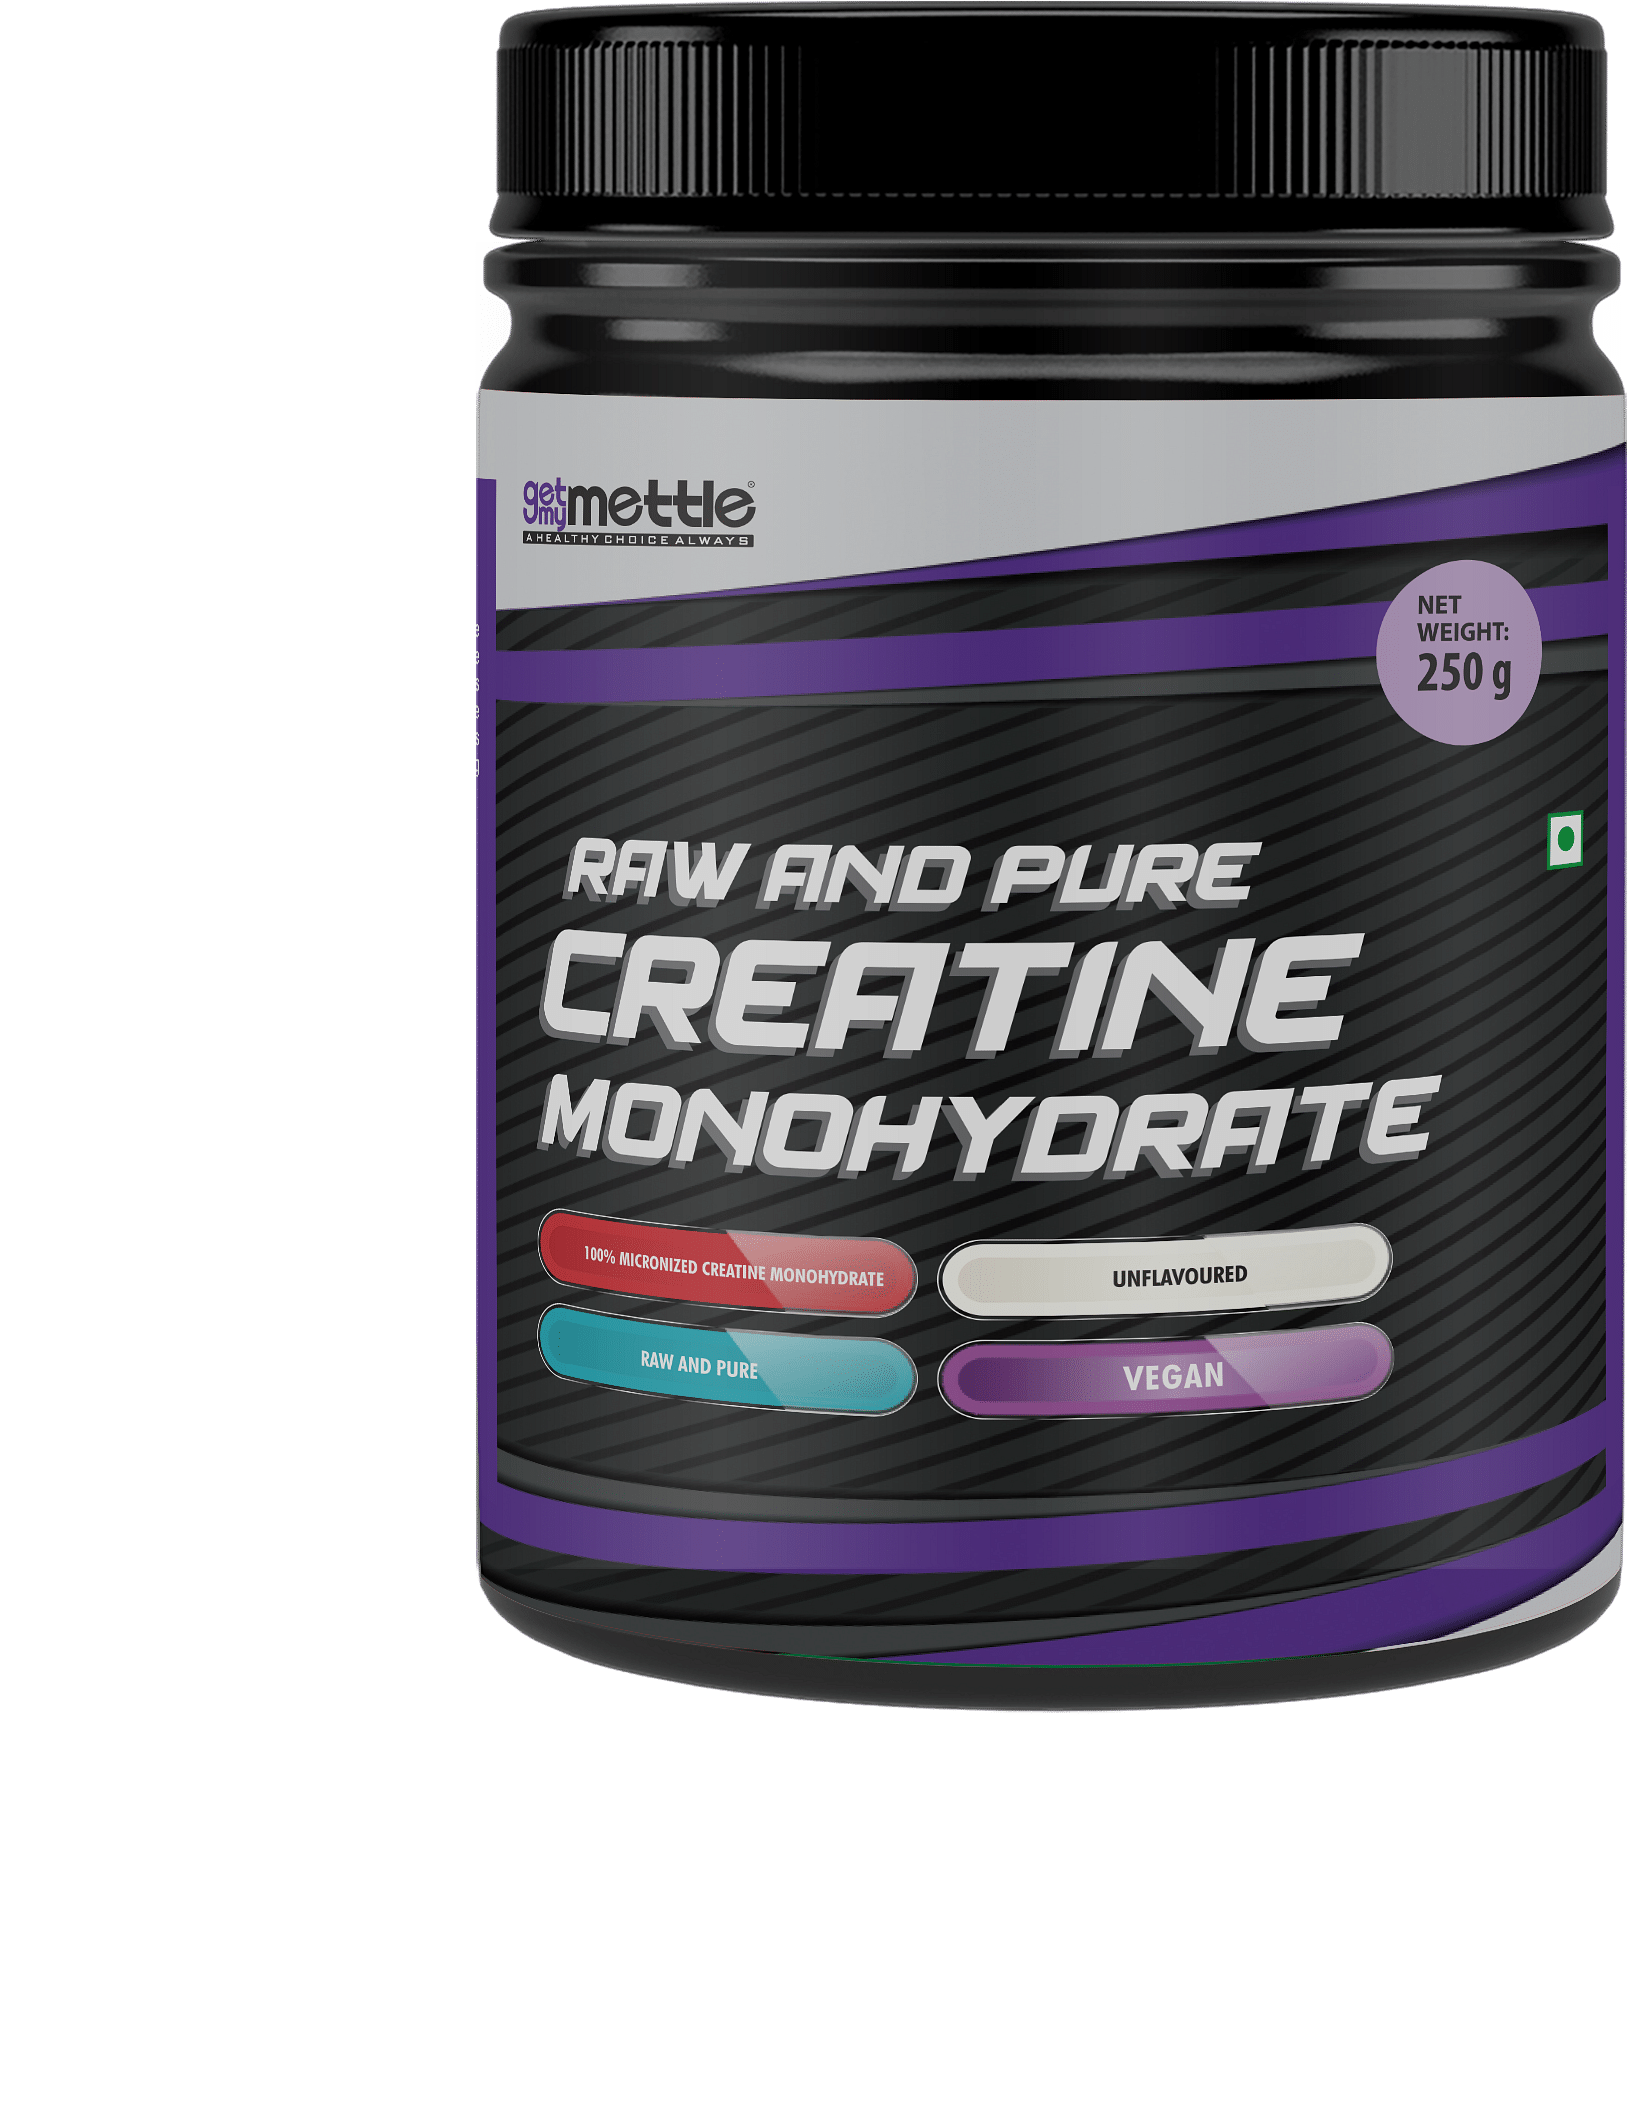 Getmymettle Raw And Pure Creatine Monohydrate Micronized Creatine Vegan 83 Servings Unflavored 